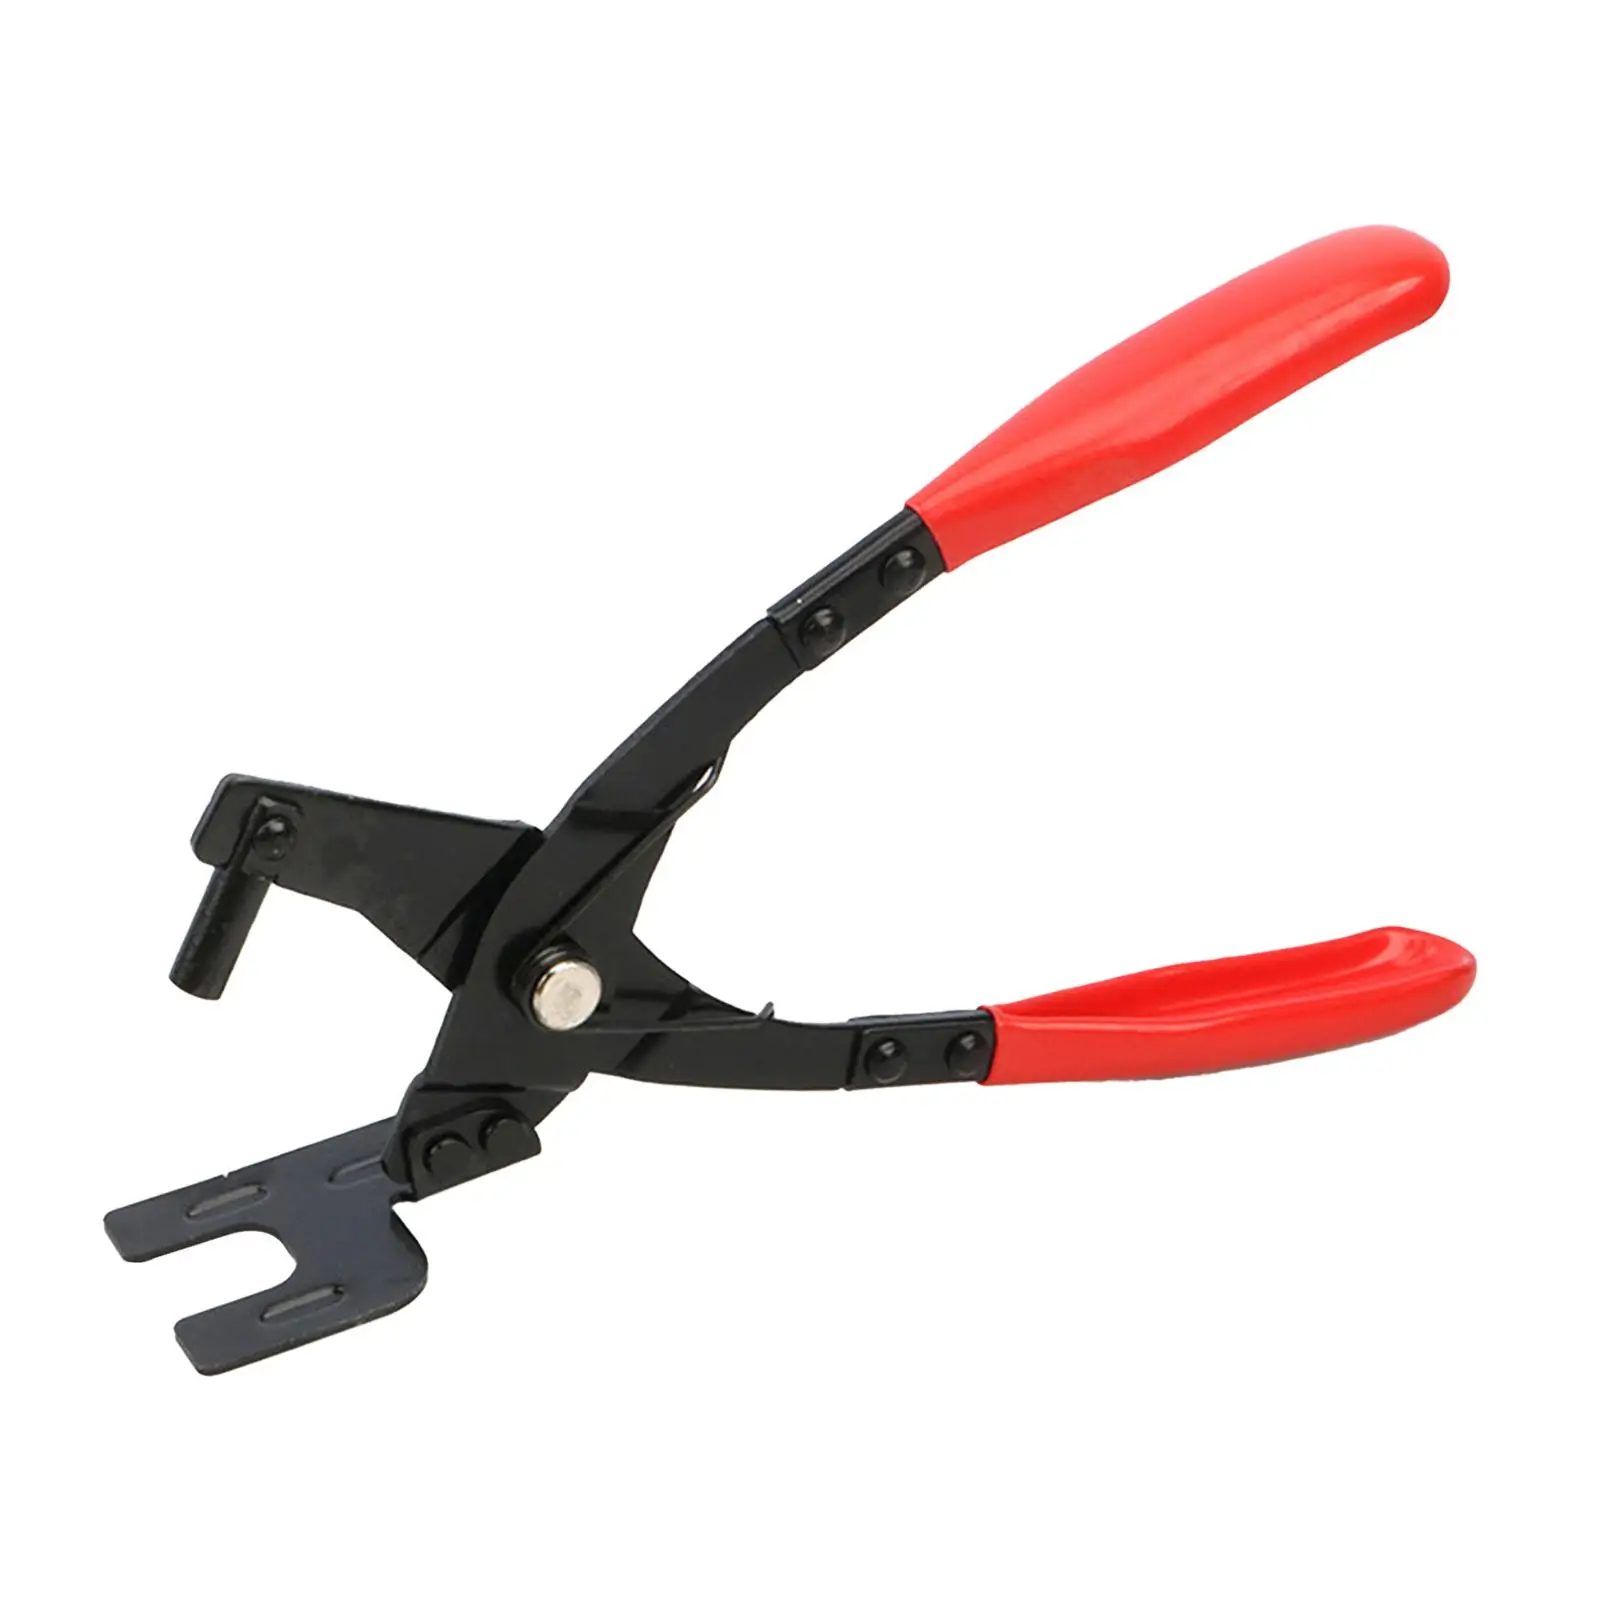 Exhaust Hanger Removal Pliers Hand Operated Tools Anti Slip Muffler Hanger